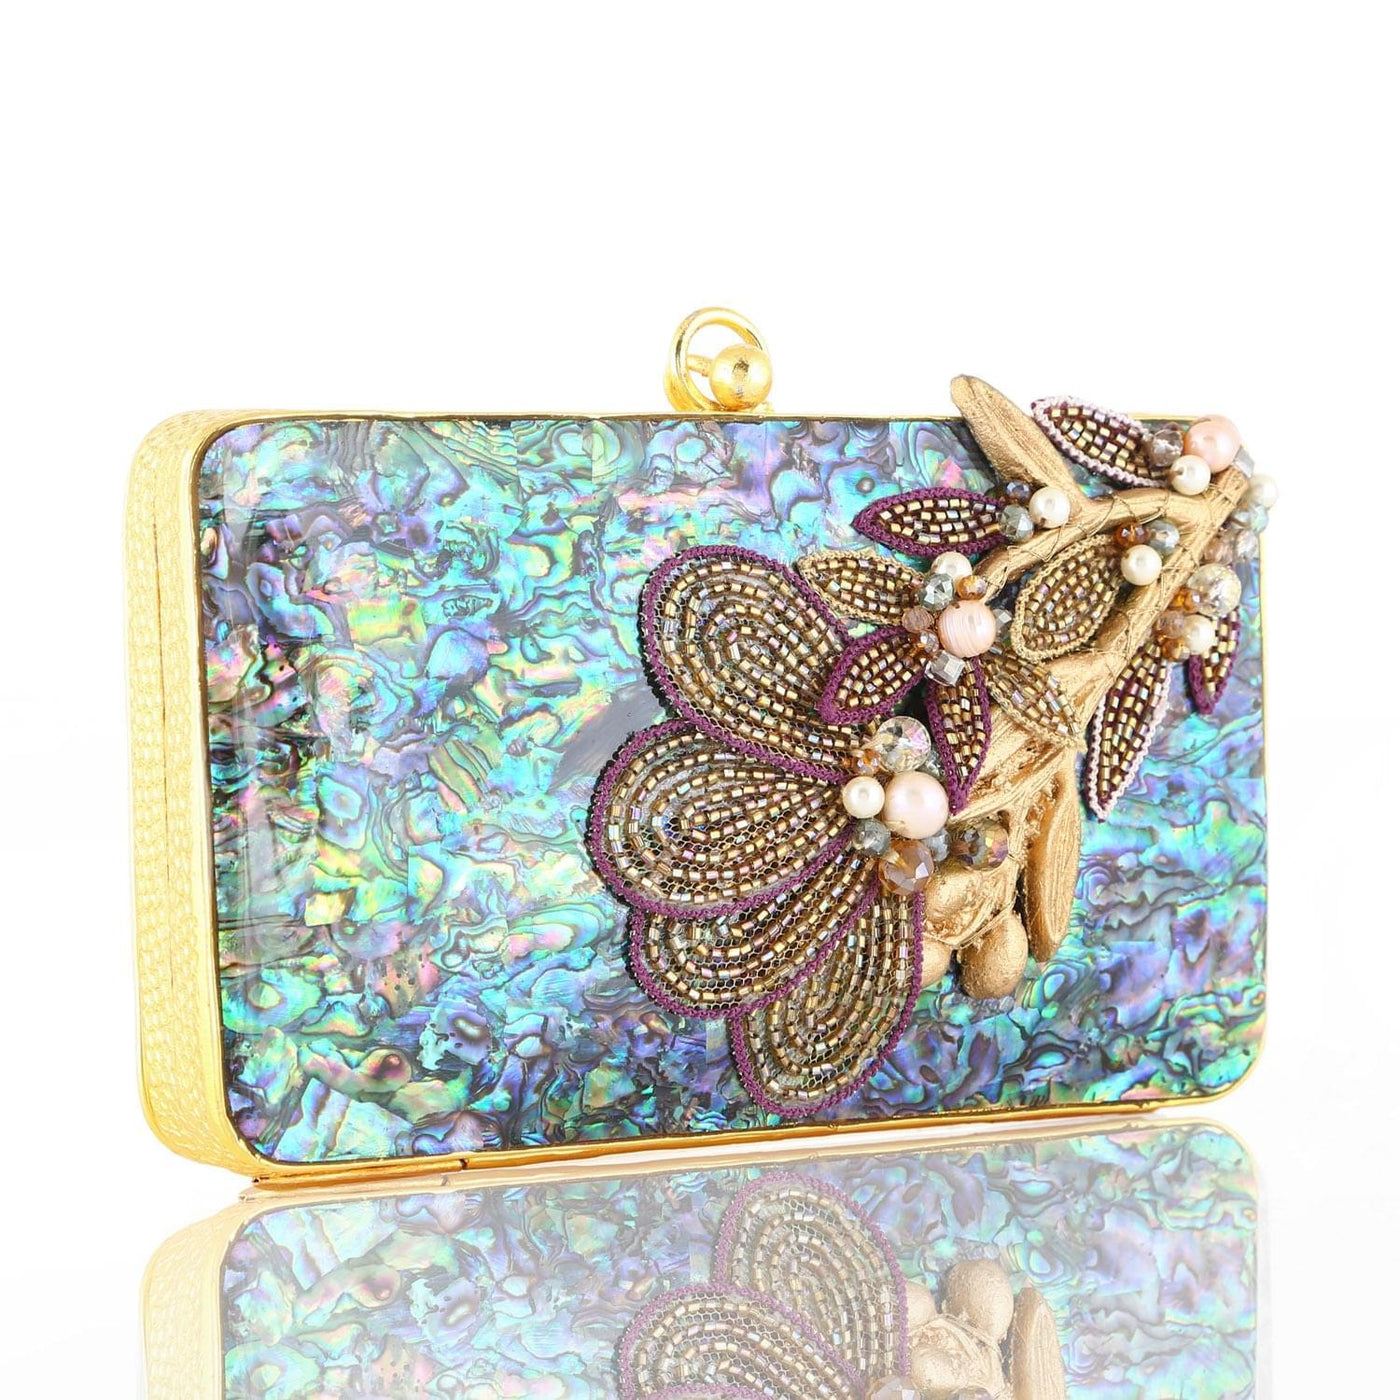 Ampelia Abalon Clutch - Women's clutch bag in gold and shell